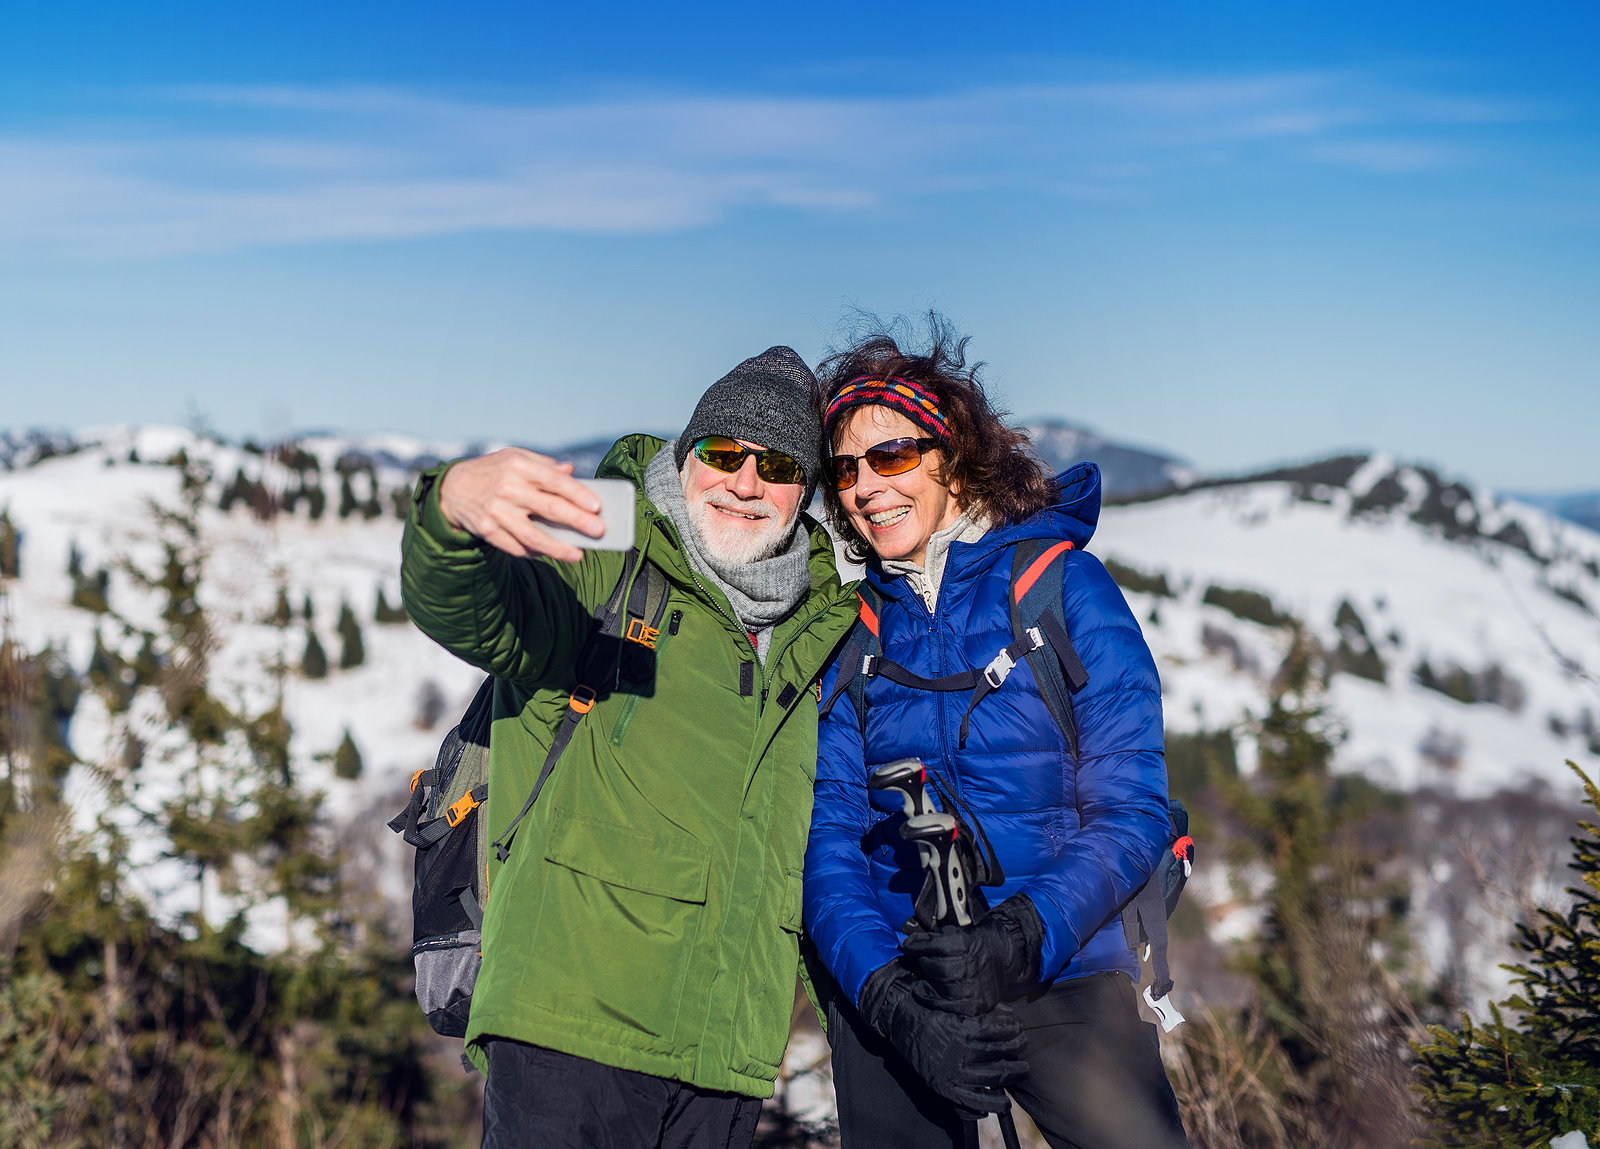 Senior couple hikers standing in snow-covered winter nature, taking selfie.